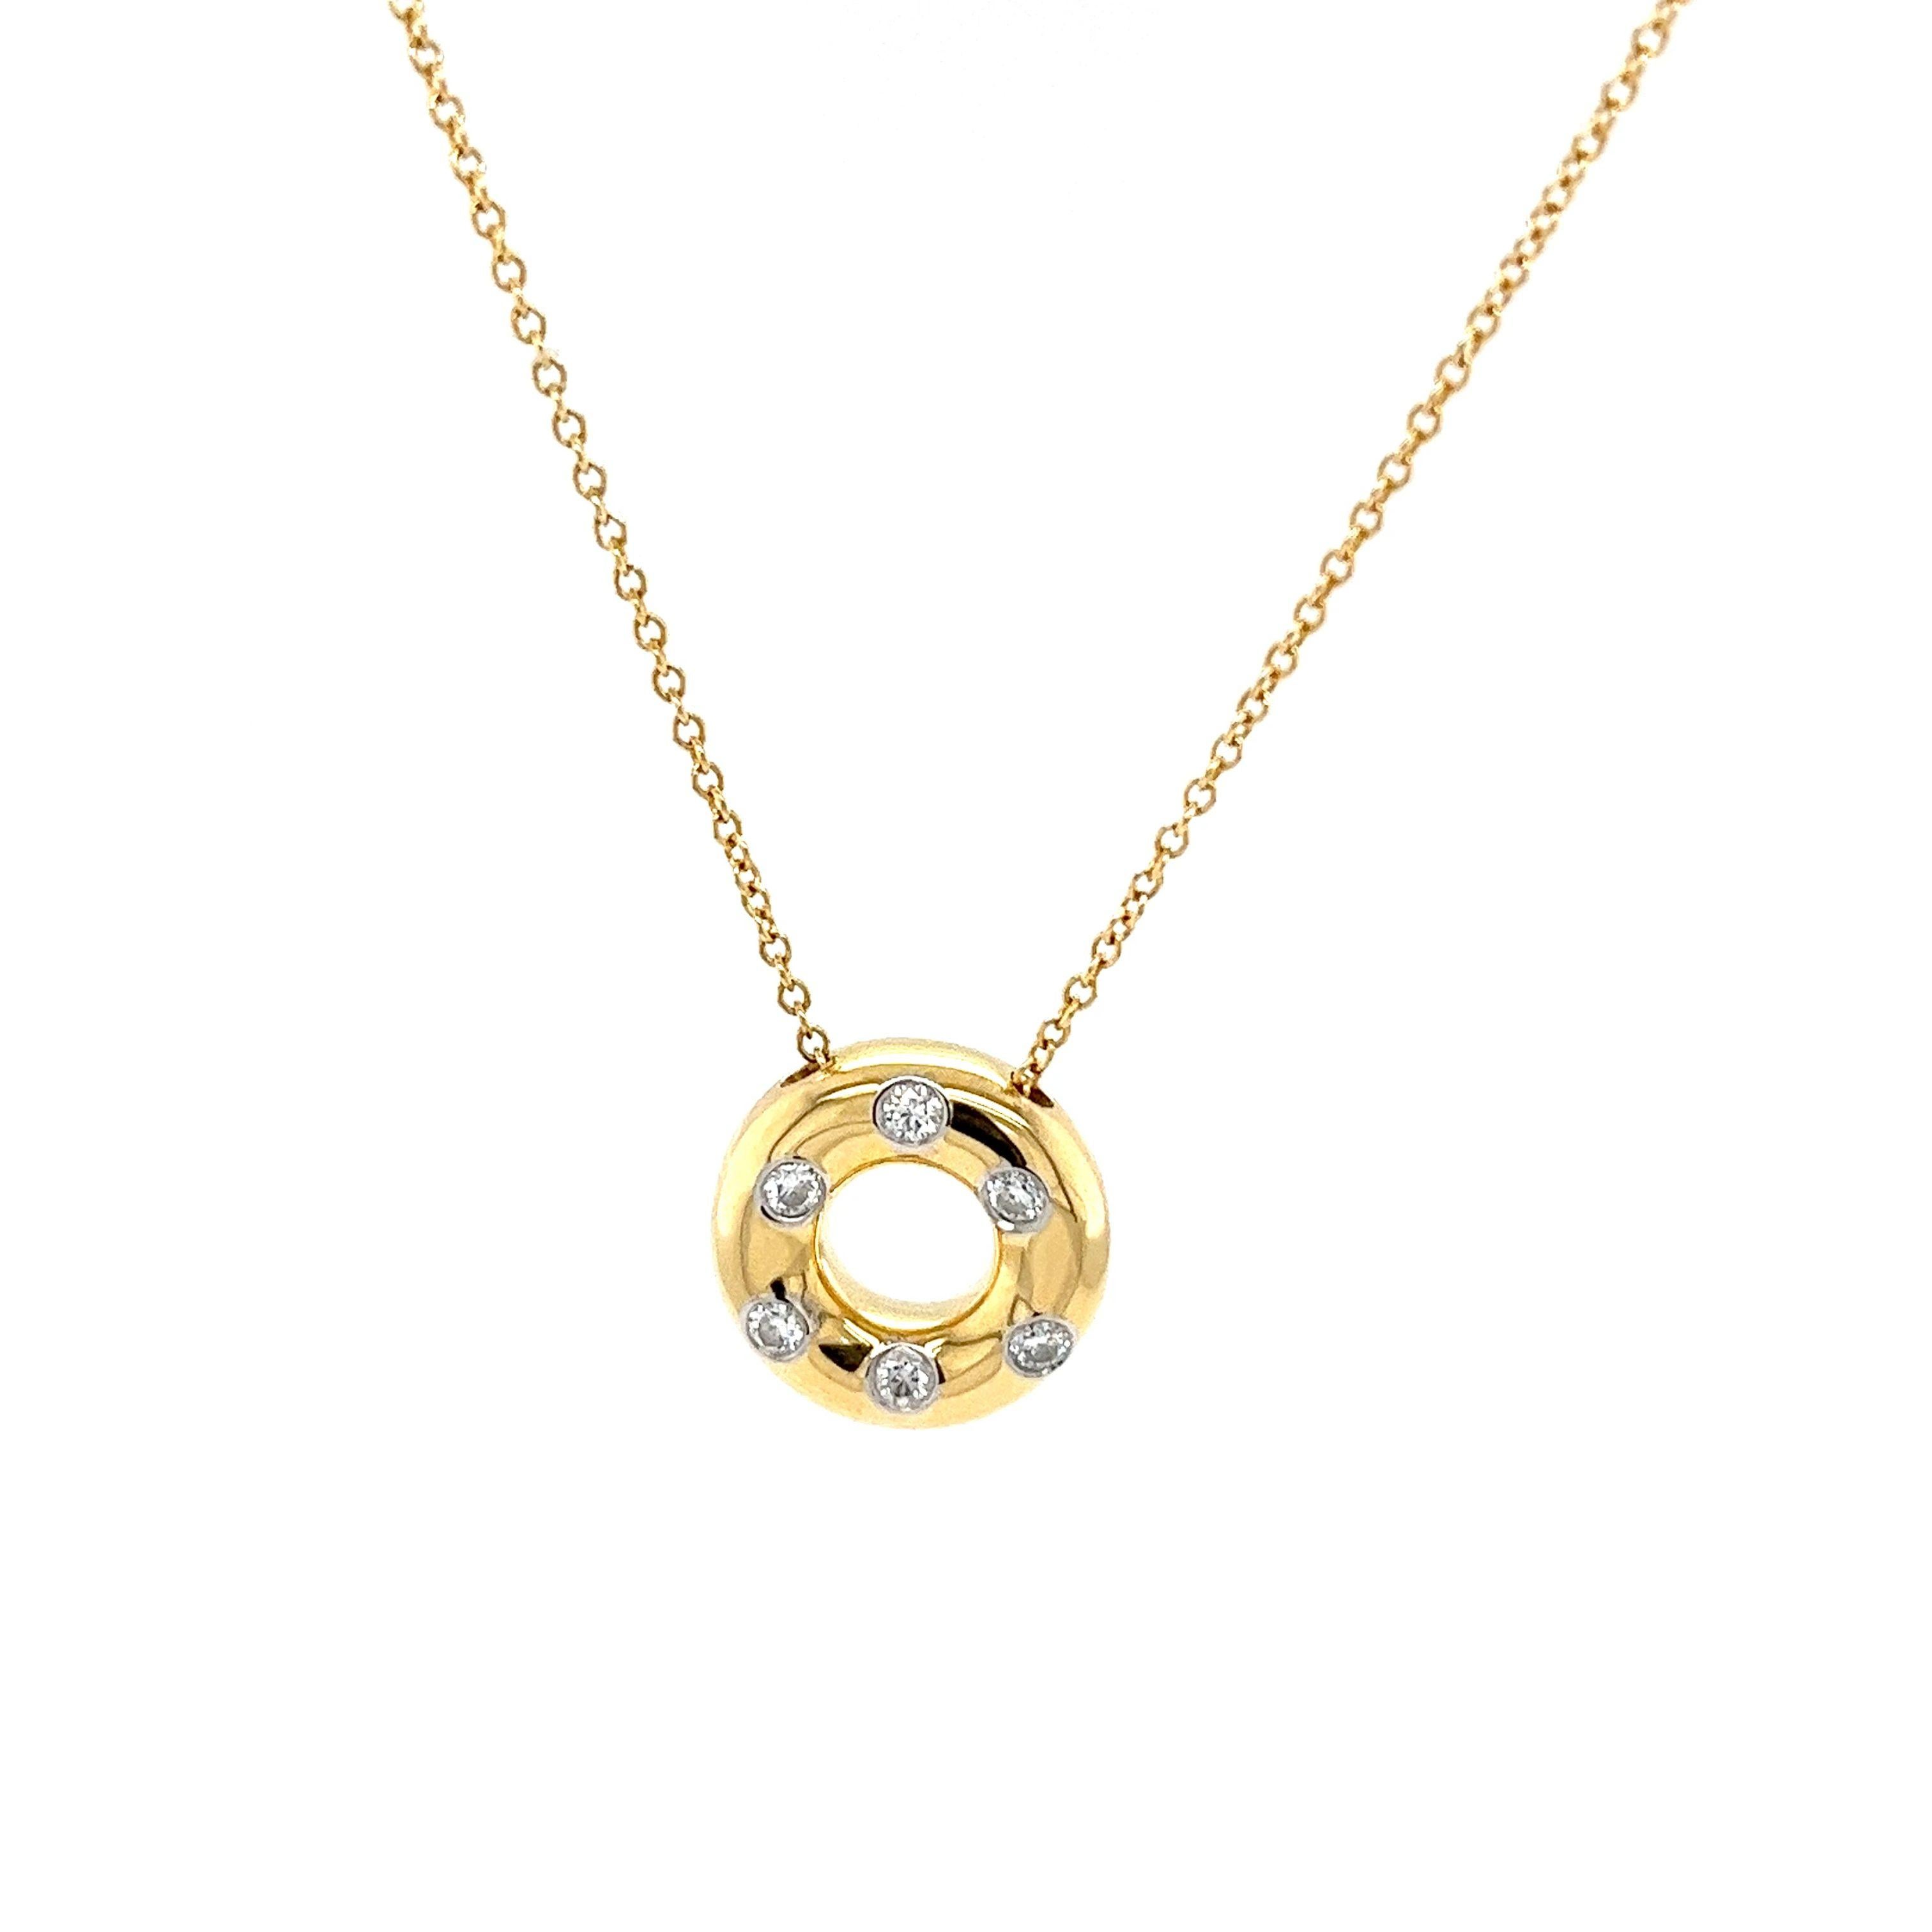 The Tiffany & Co. Étoile Diamond Pendant, set with six round diamonds, is a dazzling and sophisticated piece set in 18-carat yellow gold and platinum. The timeless design of this pendant makes it suitable for various occasions, from everyday wear to